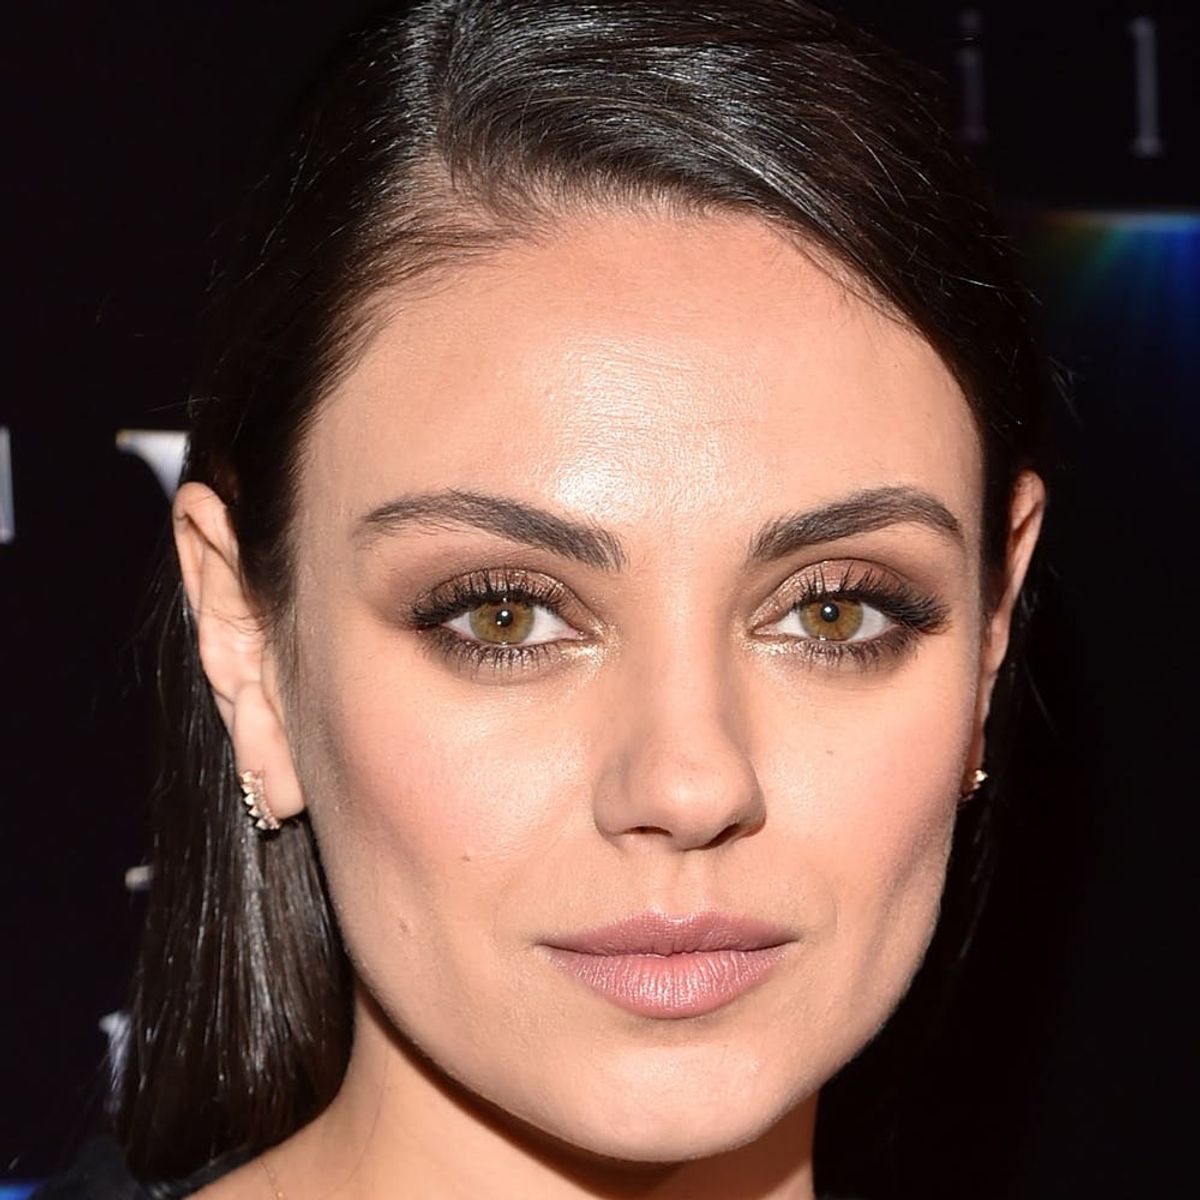 Whoa: Mila Kunis and Kate McKinnon Just Swapped Hair Colors